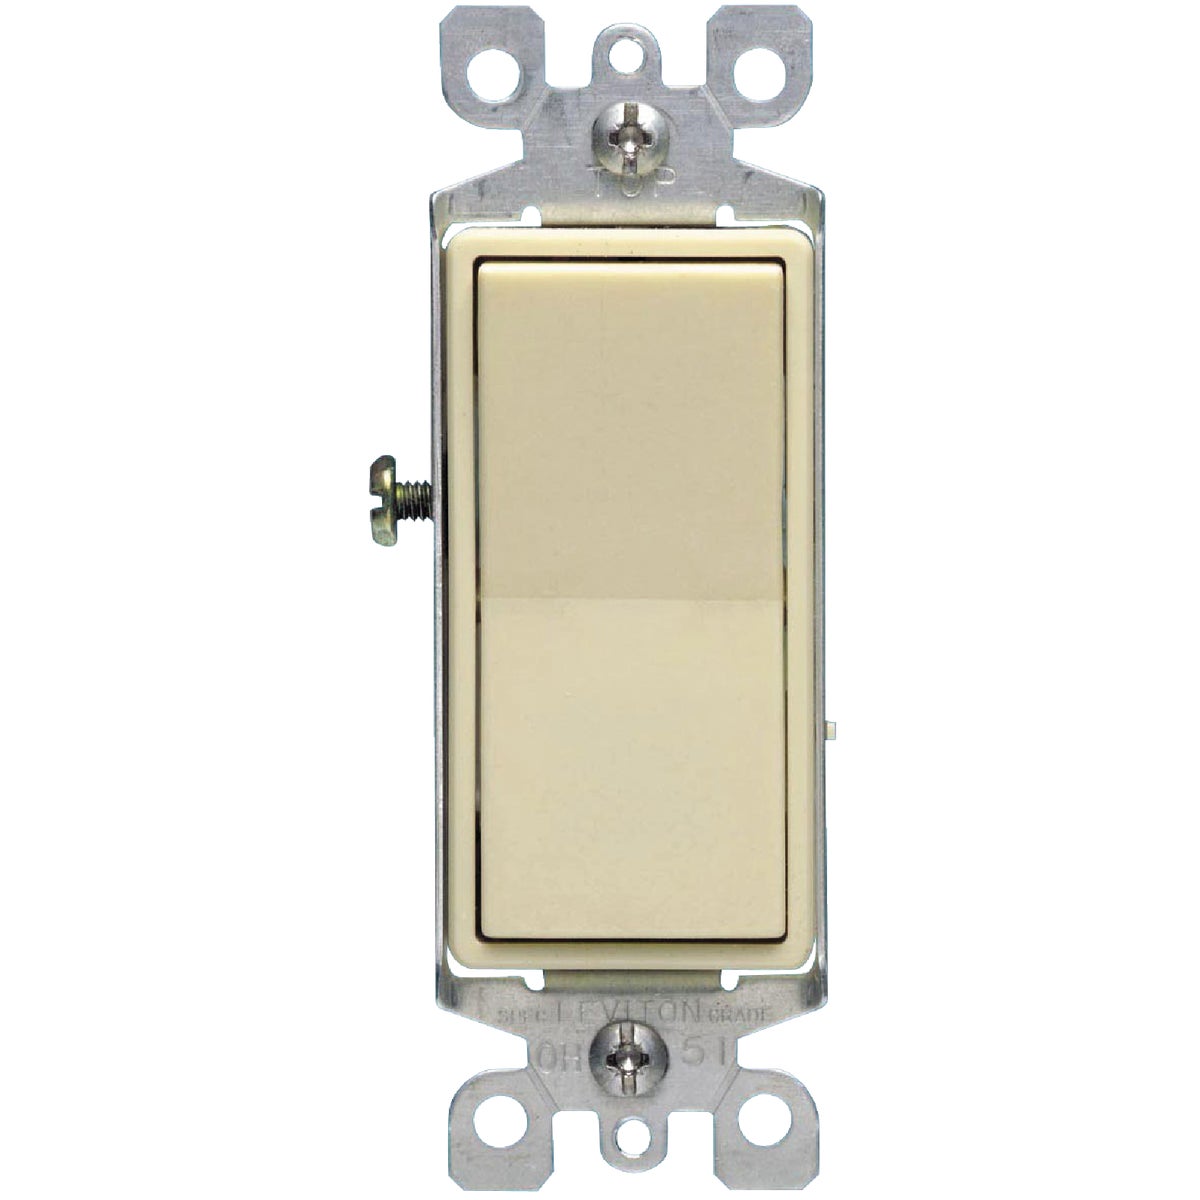 Item 513067, 4-way Decora switch allows faster installation with Quickwire push-in and 